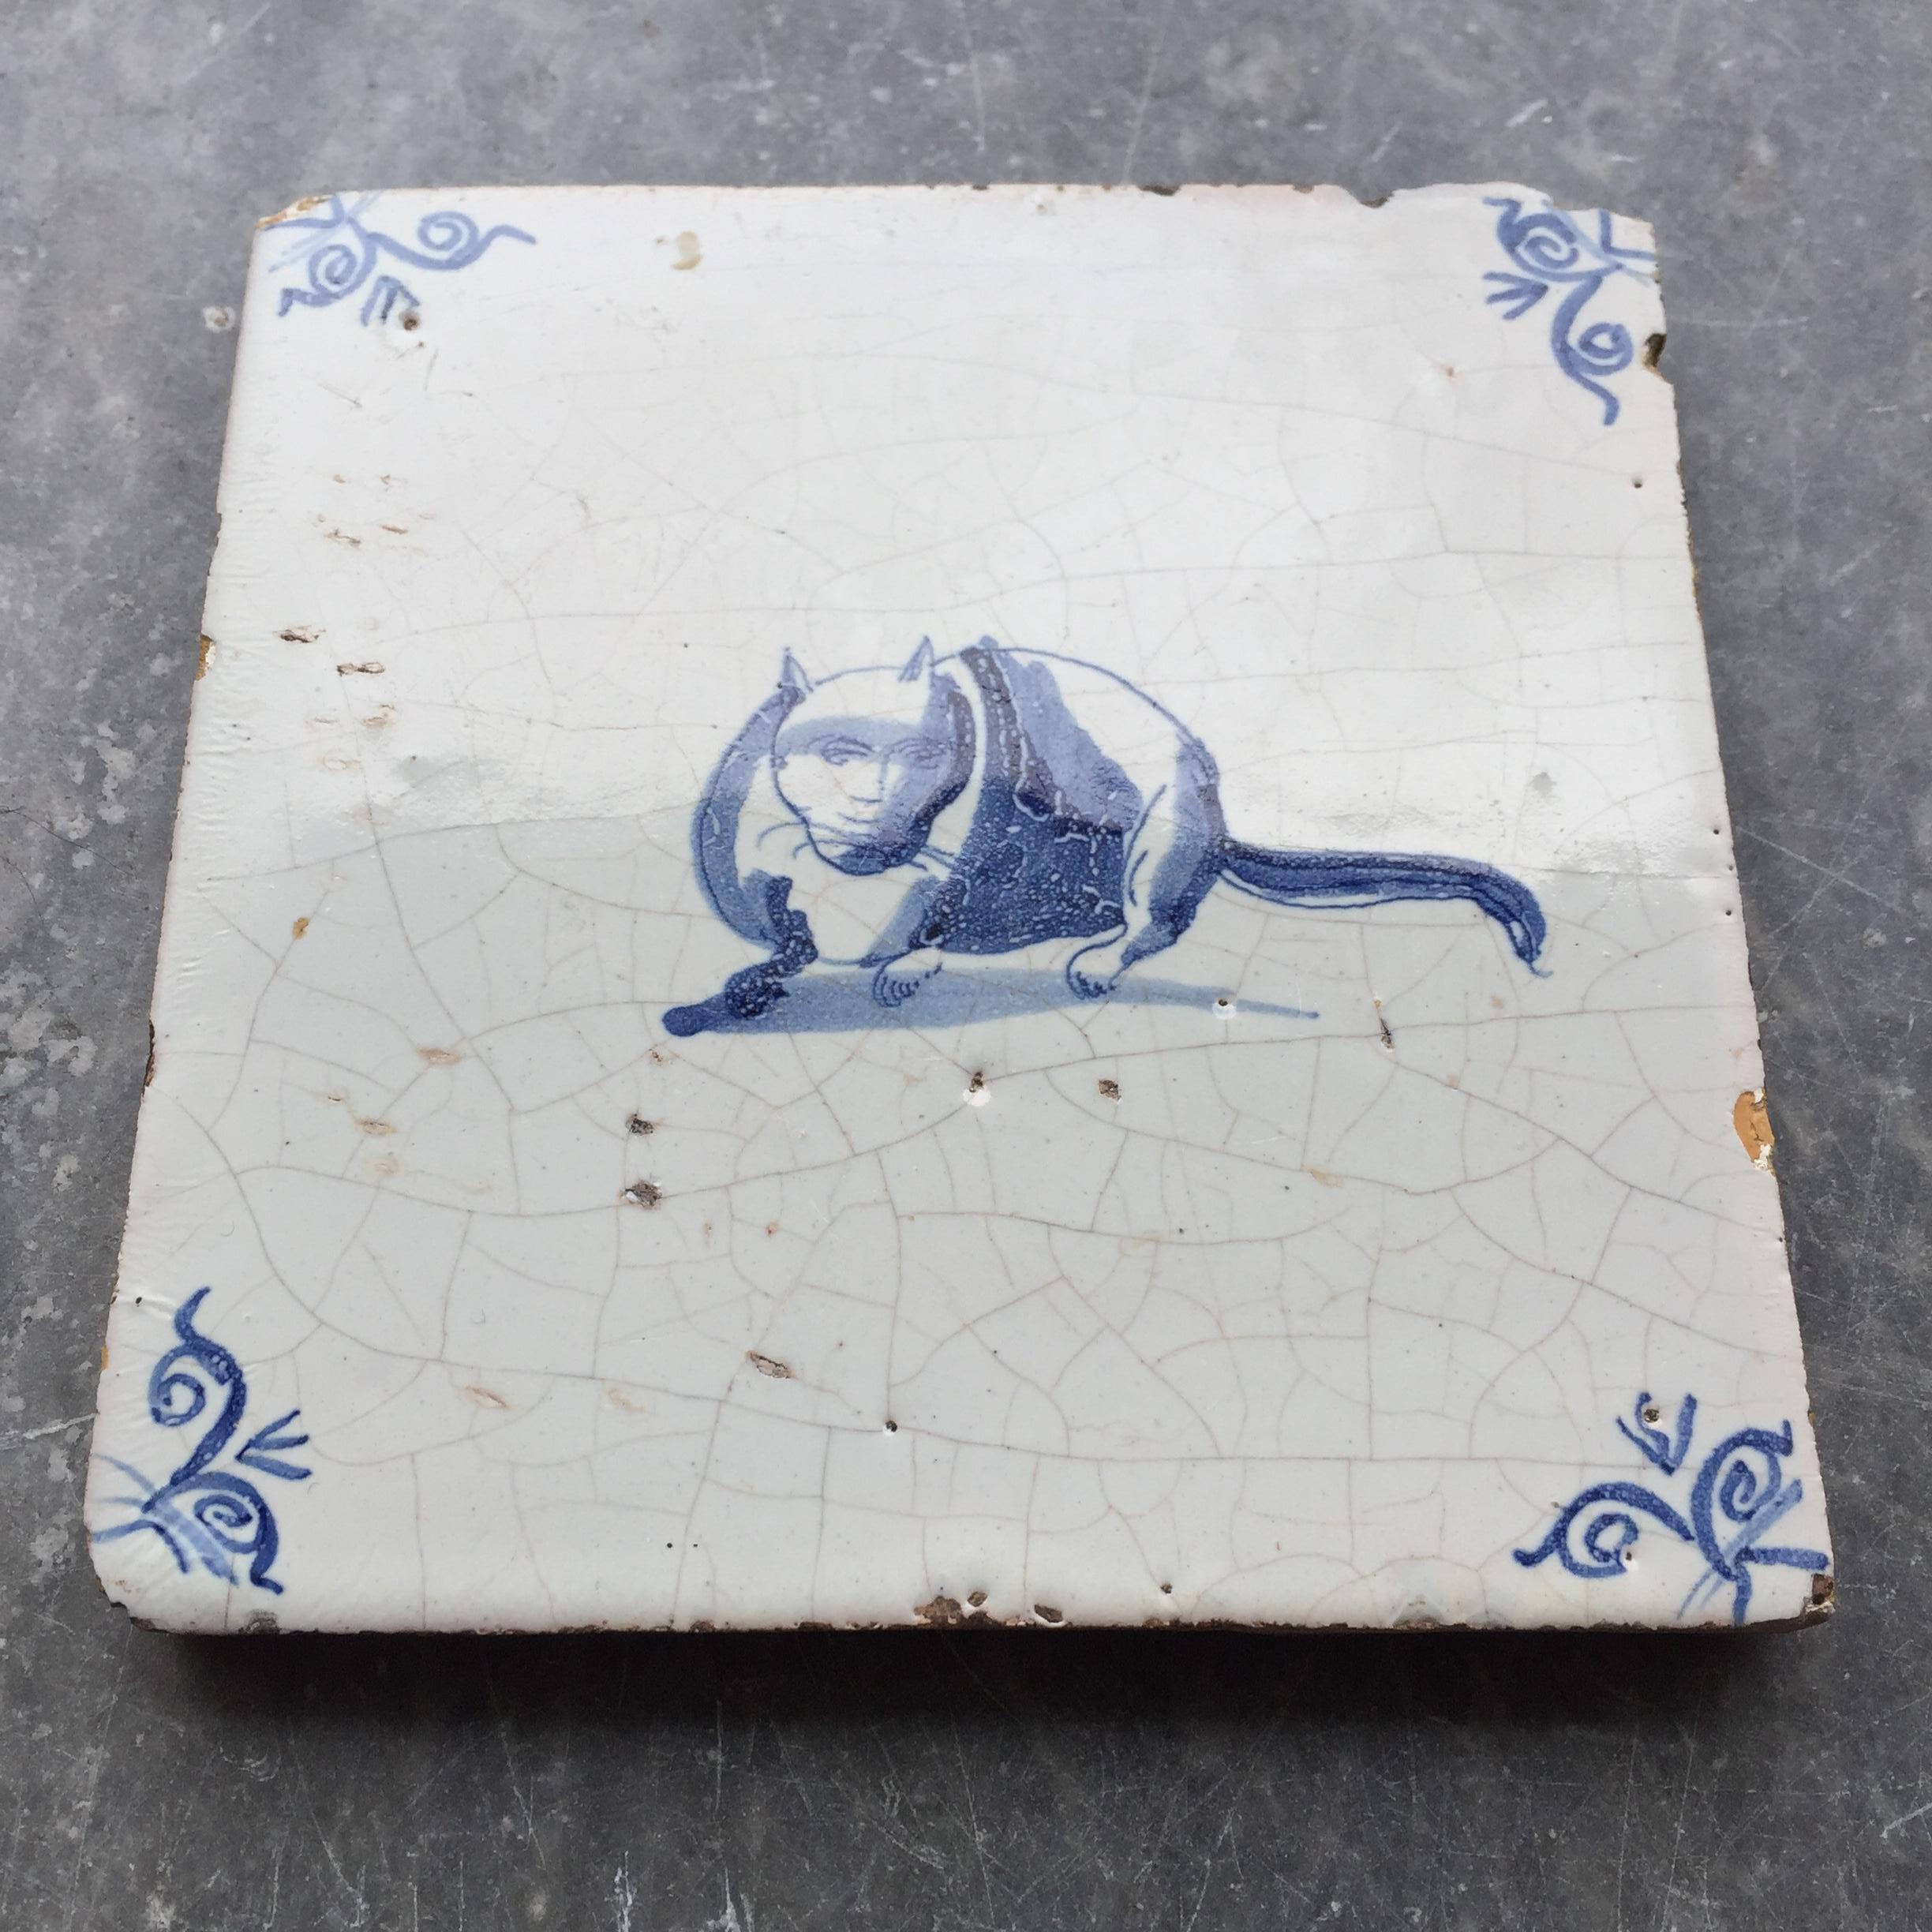 Baroque Blue and White Dutch Delft Tile with Fat Cat, Mid 17th Century